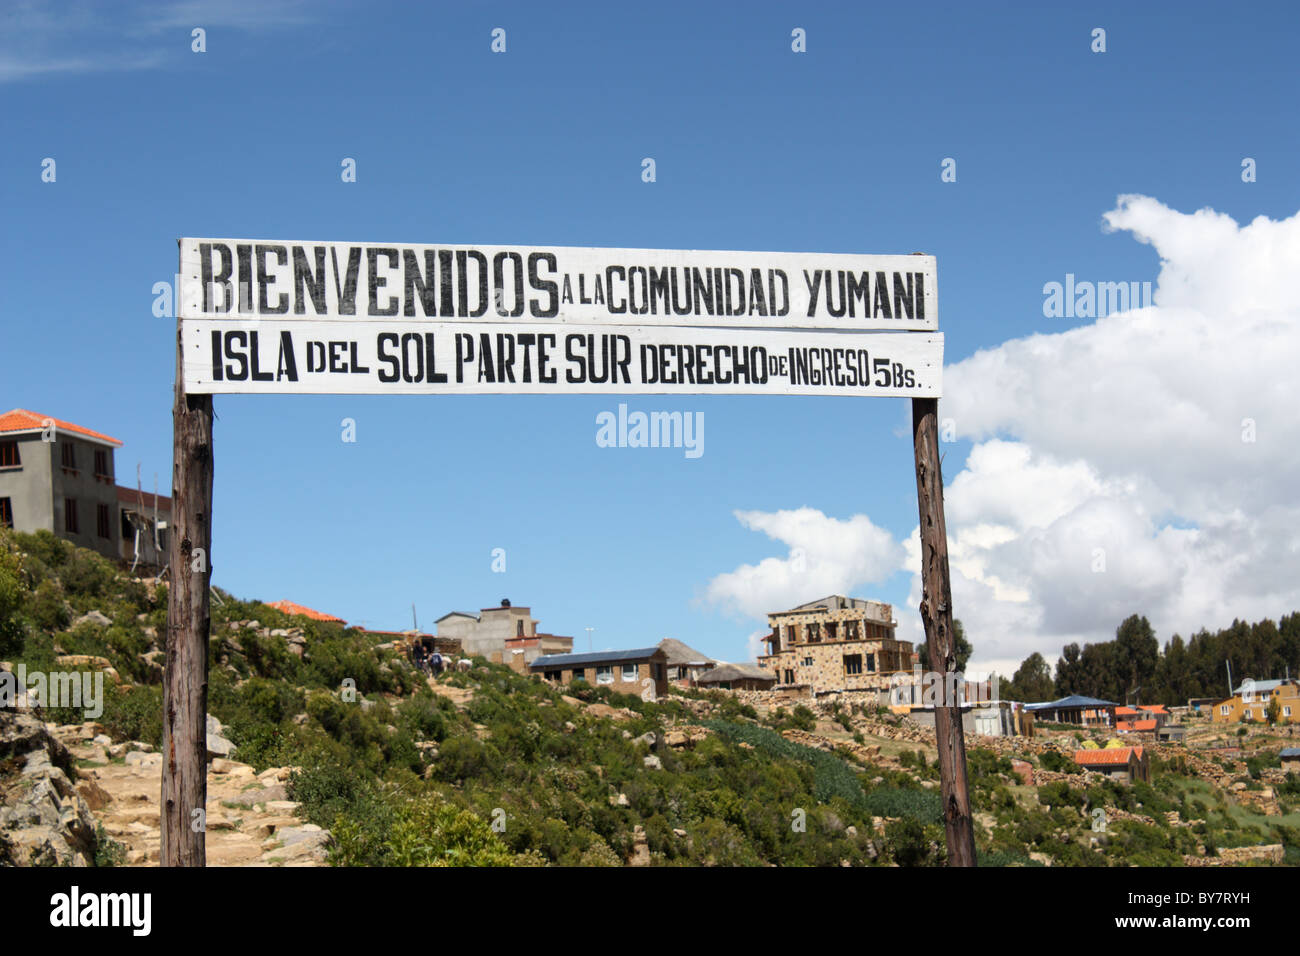 Spenish Bienvenidos Welcome Sign with Palm Trees in the Background Stock  Photo - Image of island, spanish: 210804398